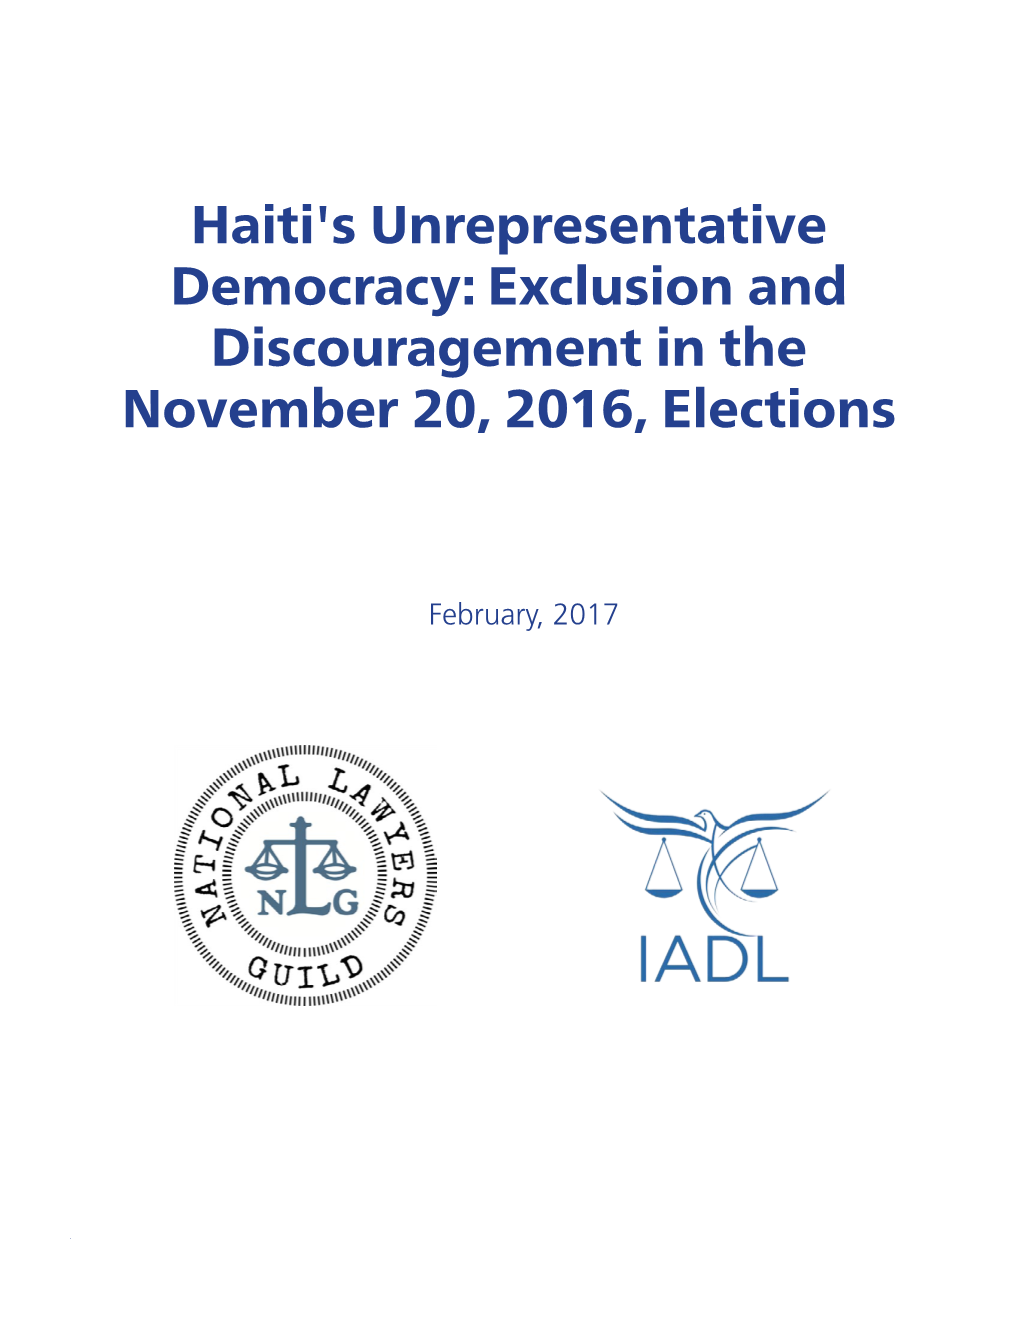 Haiti's Unrepresentative Democracy: Exclusion and Discouragement in the November 20, 2016, Elections